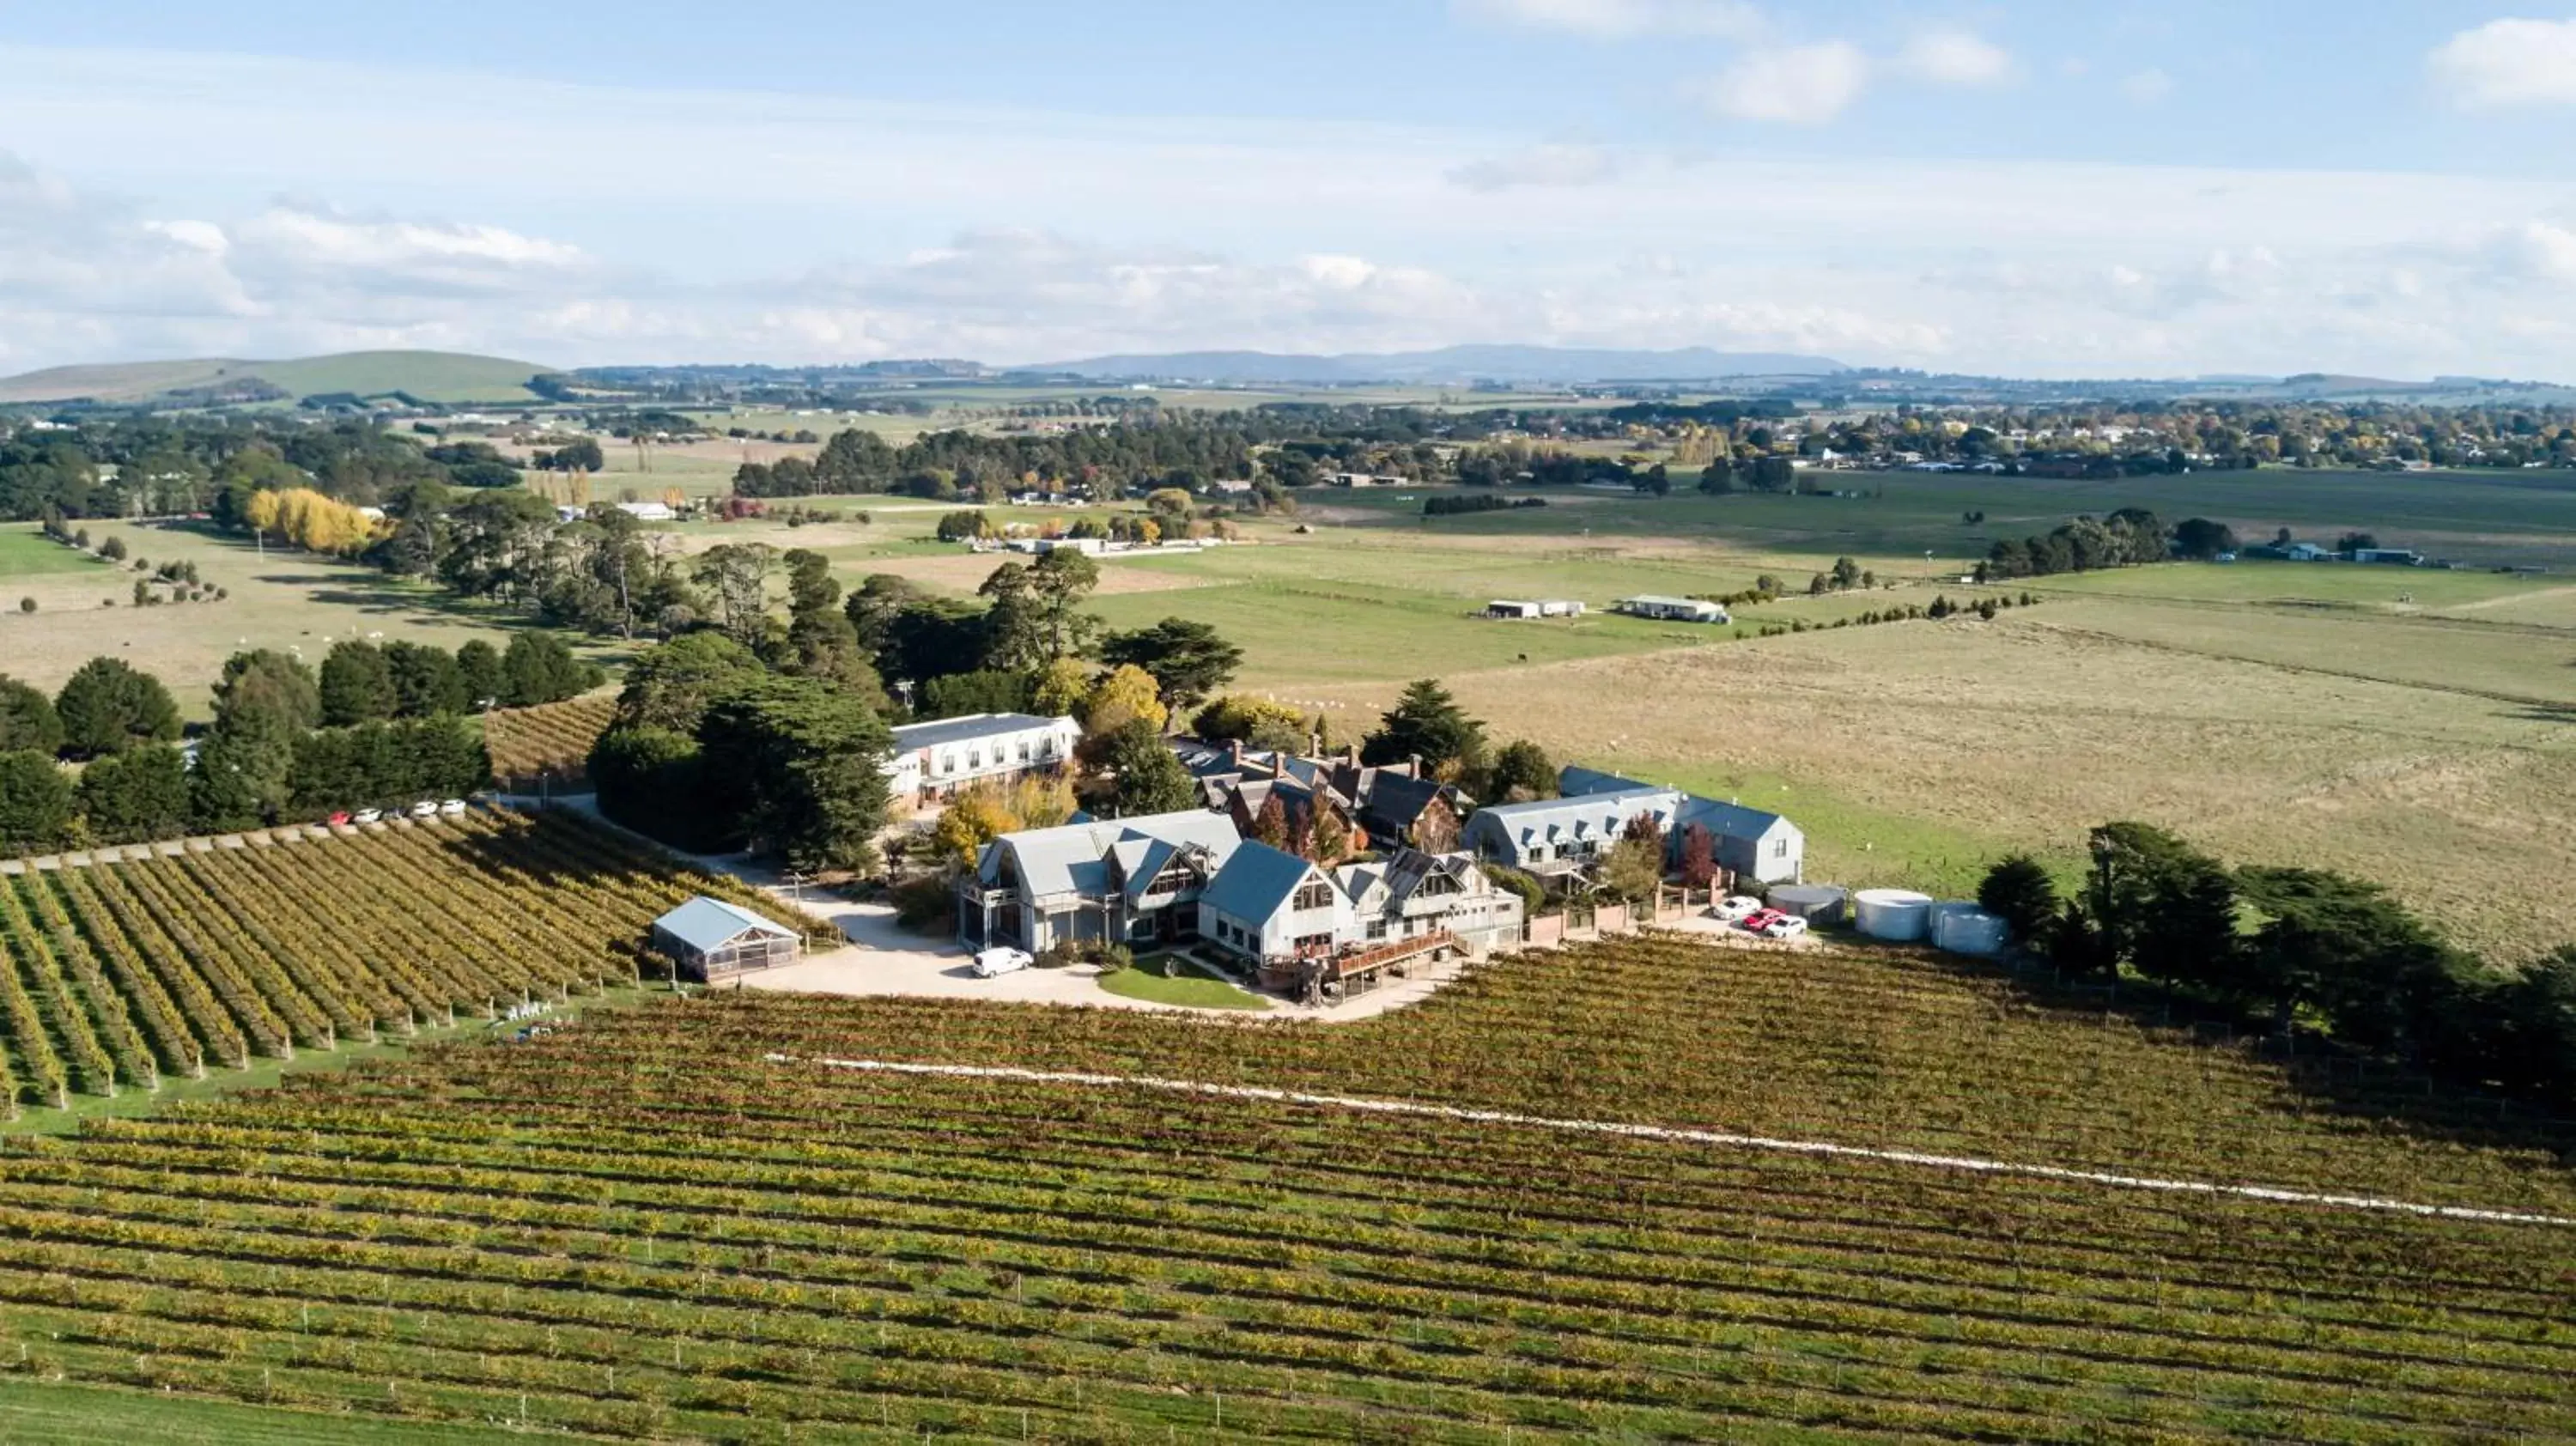 Day, Bird's-eye View in Cleveland Winery